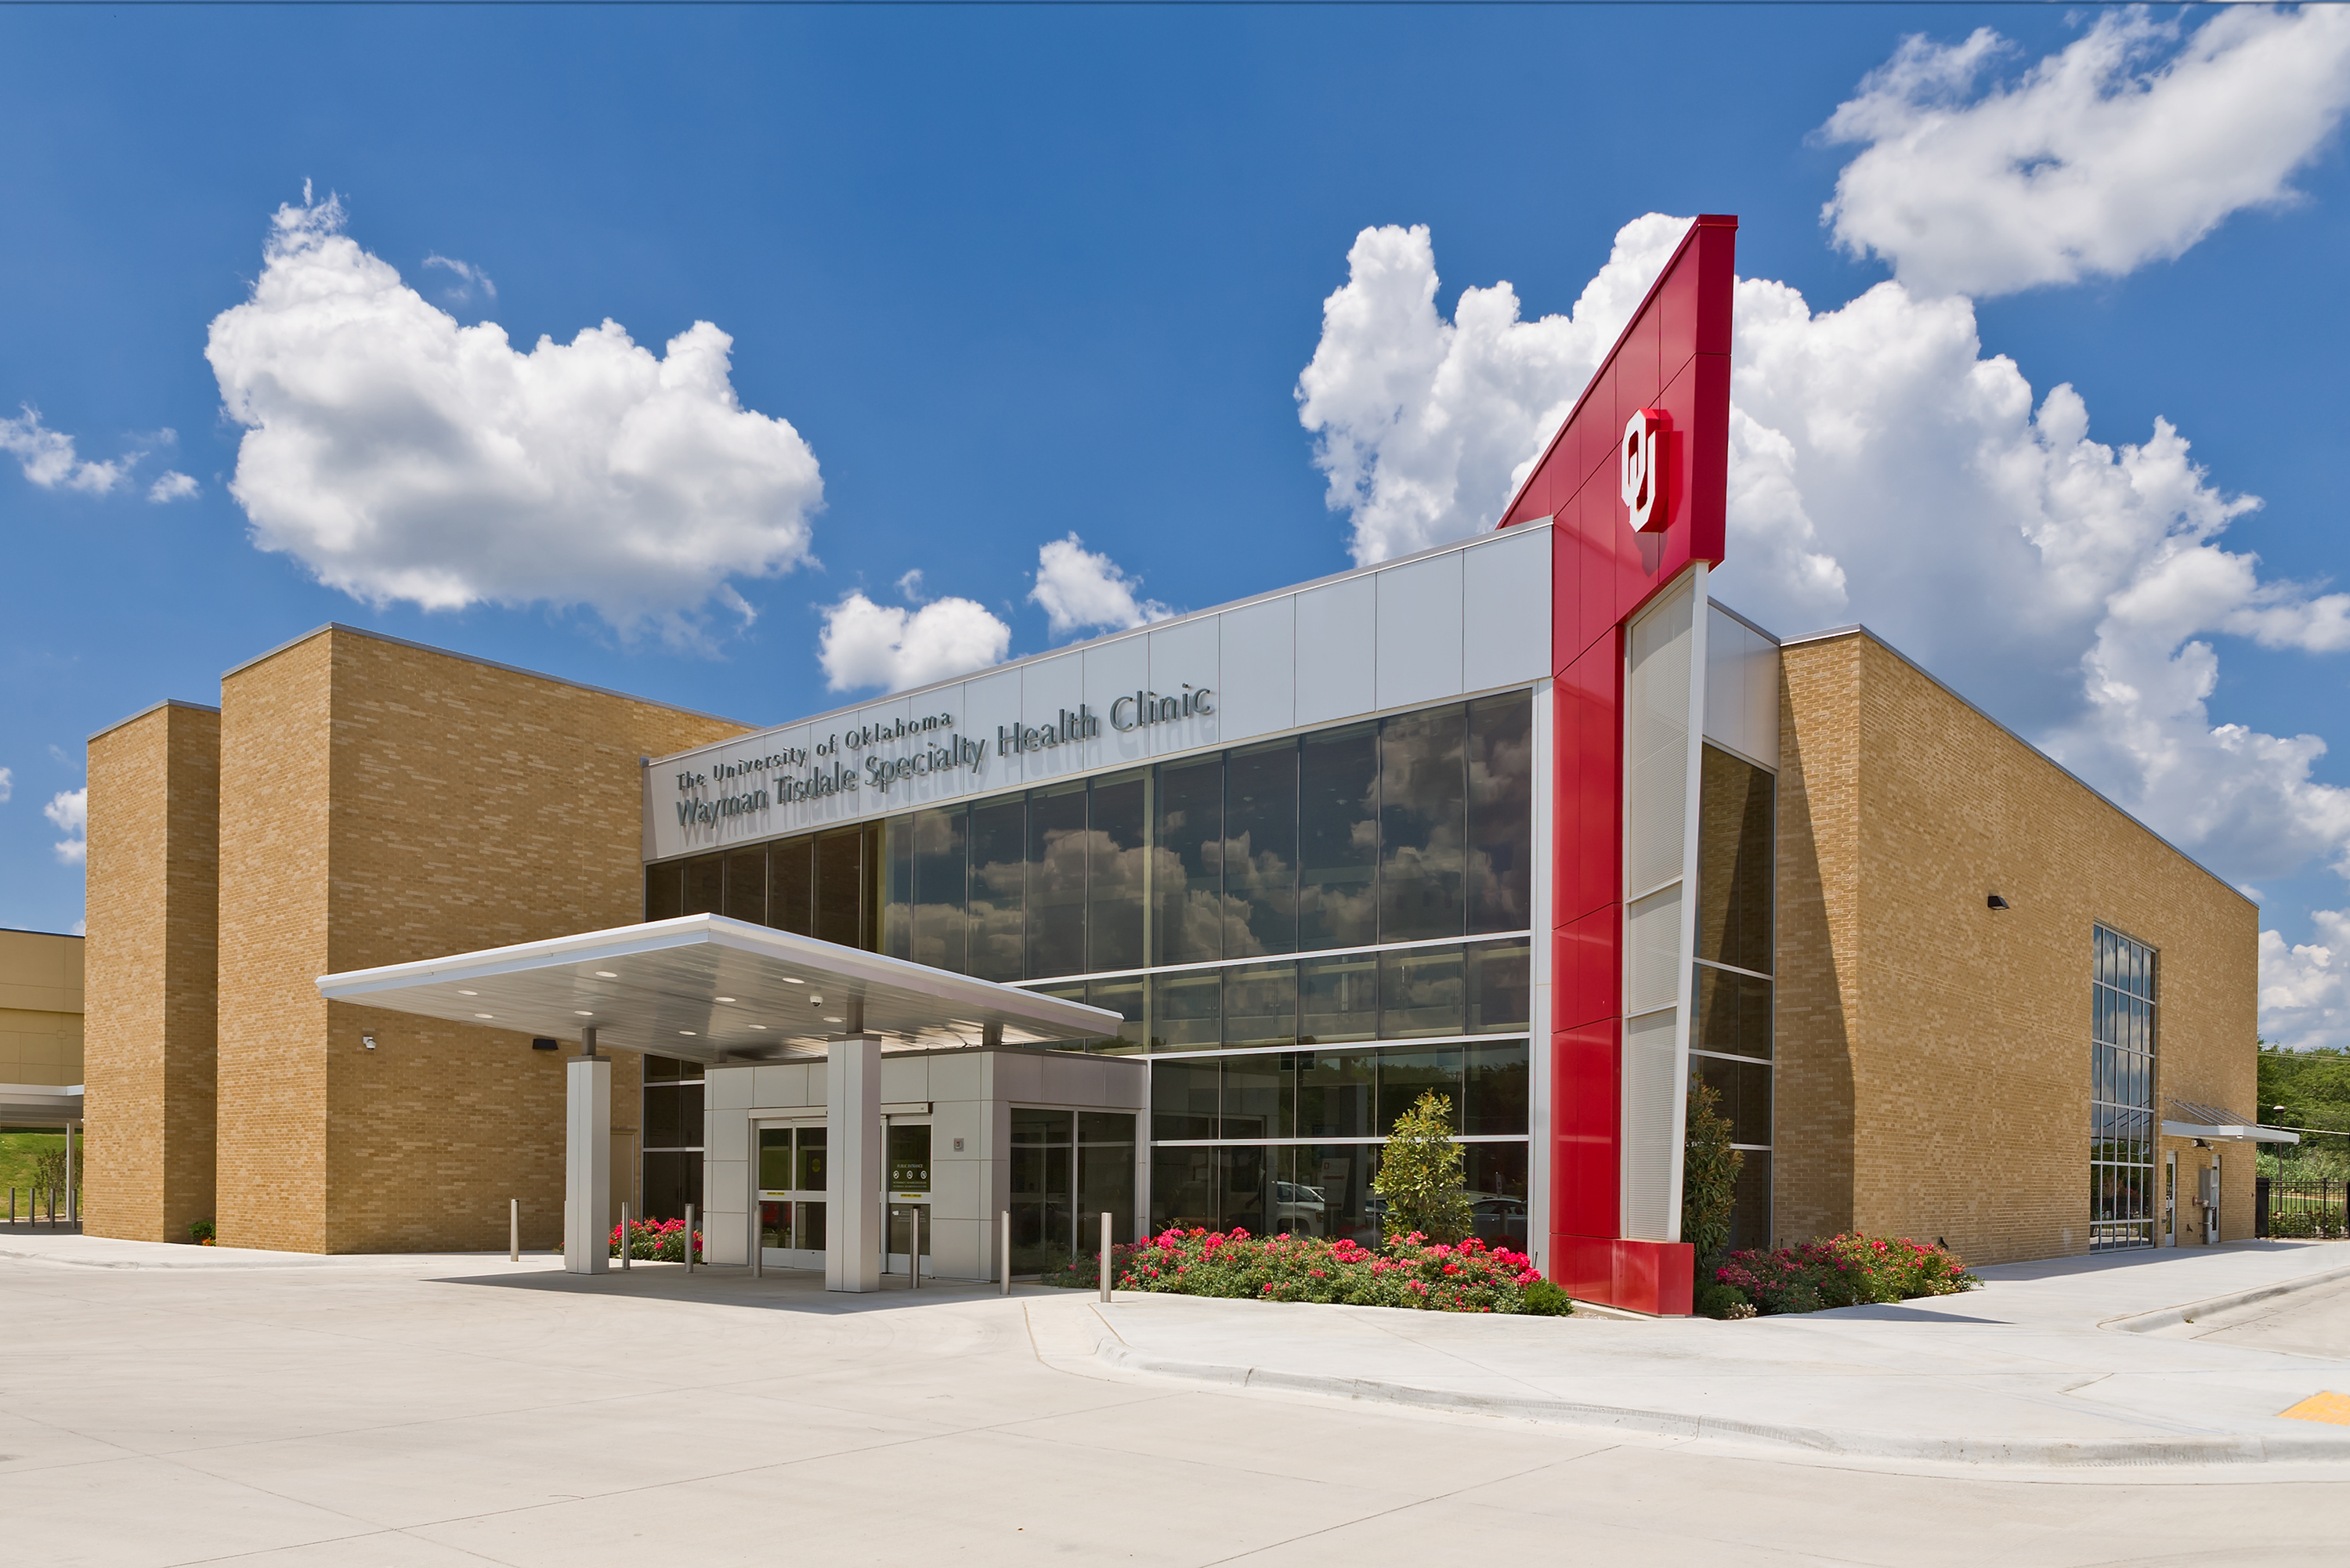 Wayman Tisdale Specialty Health Clinic - Wallace Engineering3000 x 2002